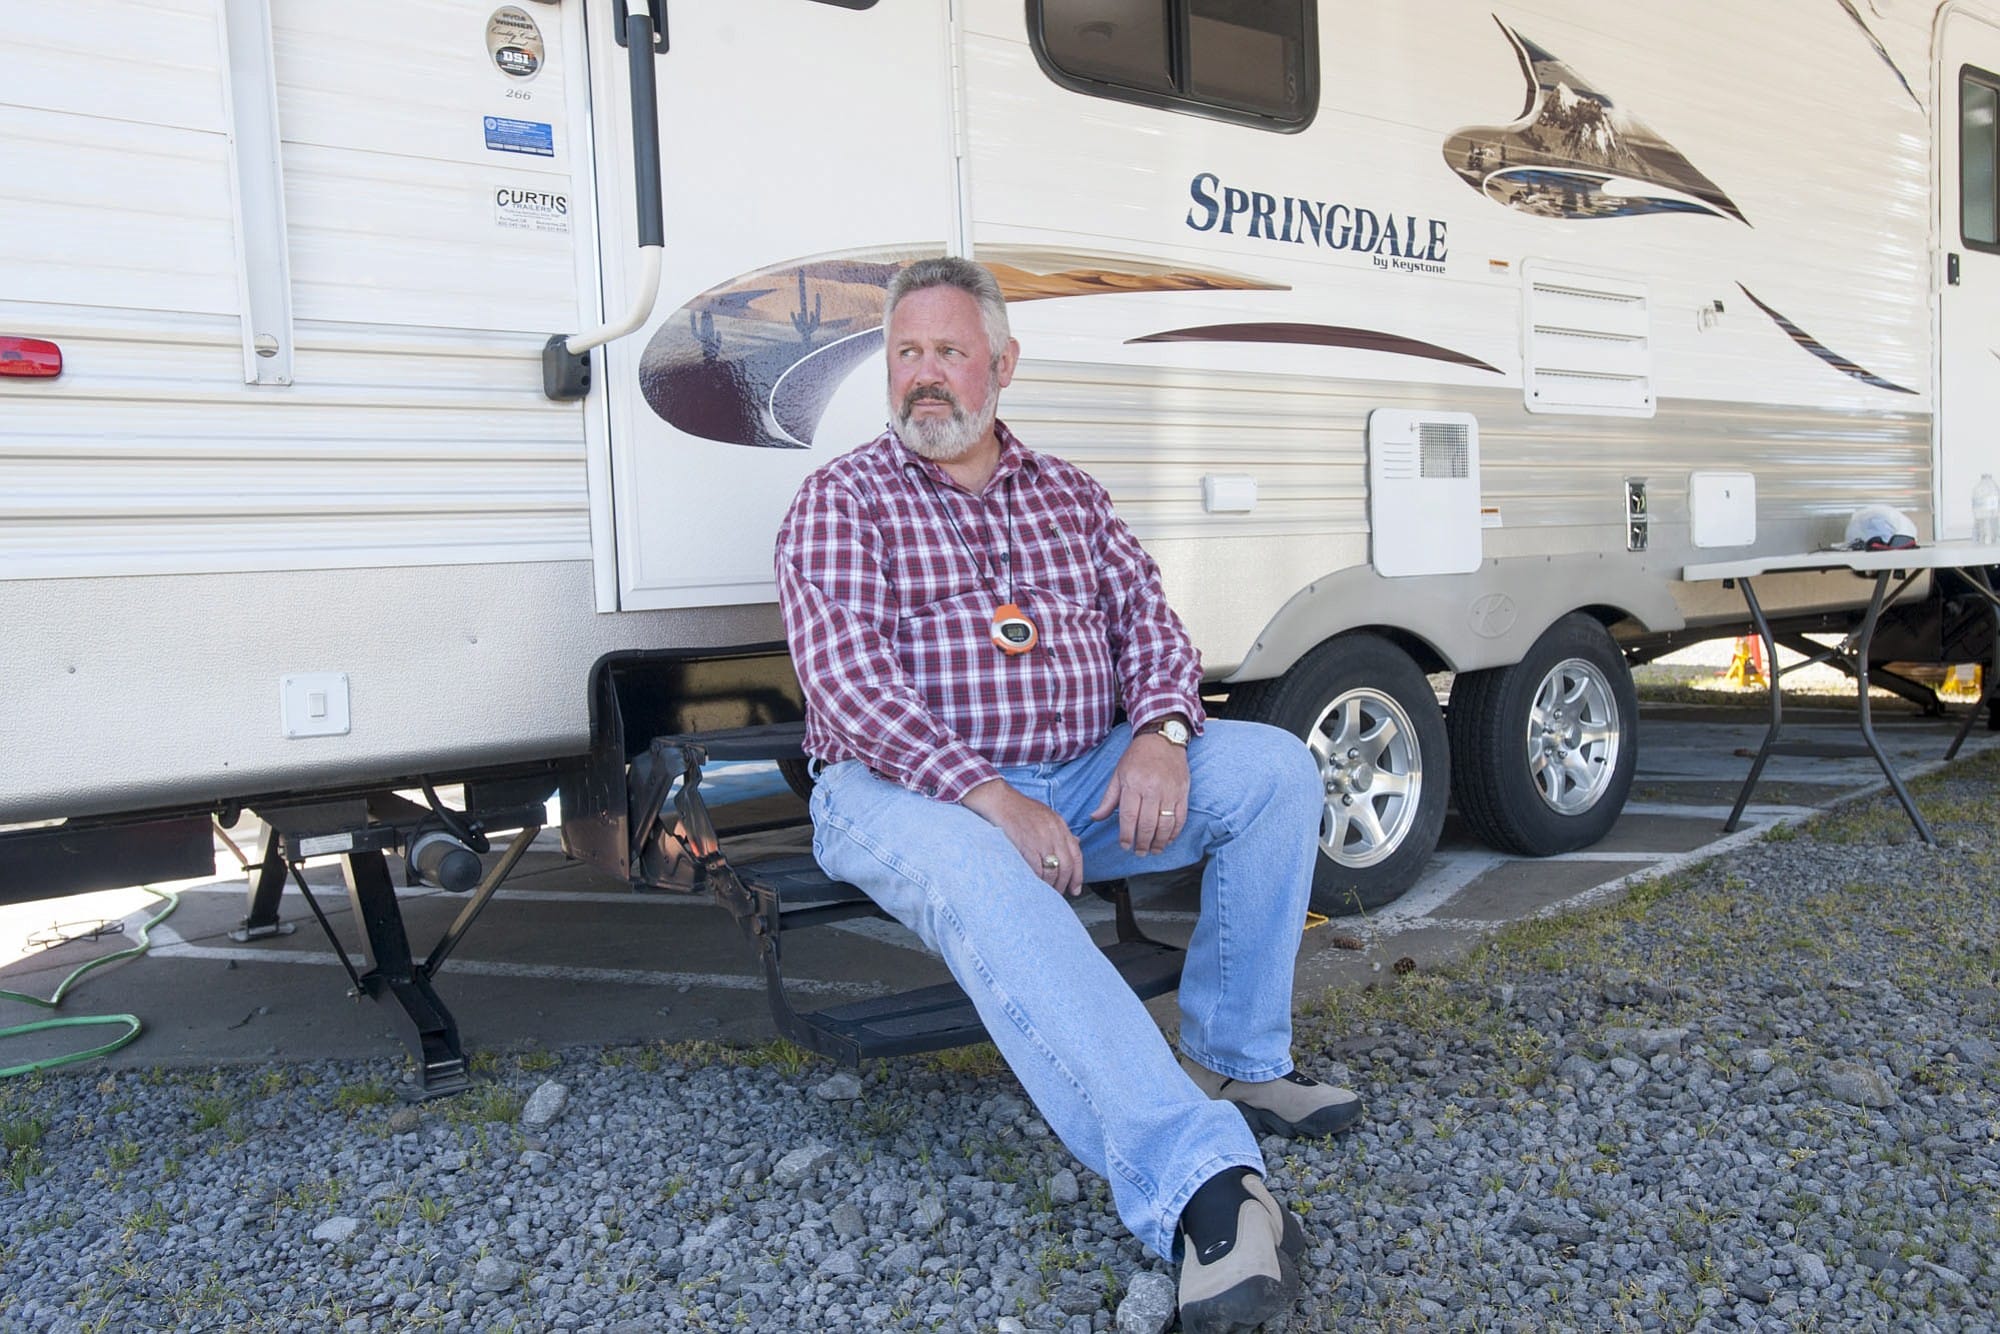 Washougal Mayor Sean Guard hangs out in front of his RV, near the BNSF Railway tracks.